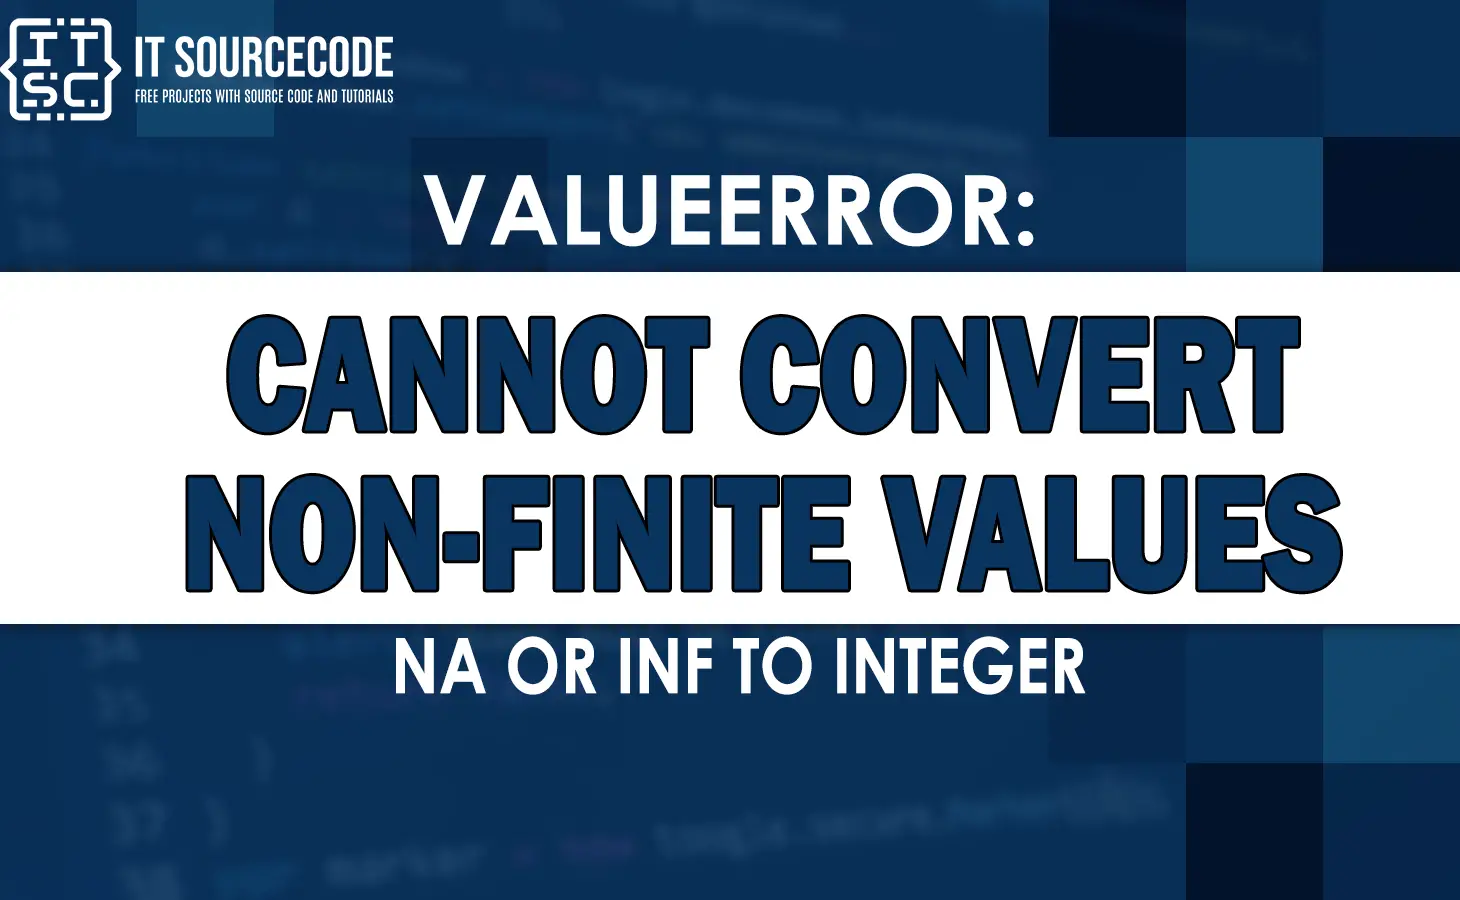 valueerror cannot convert non-finite values na or inf to integer